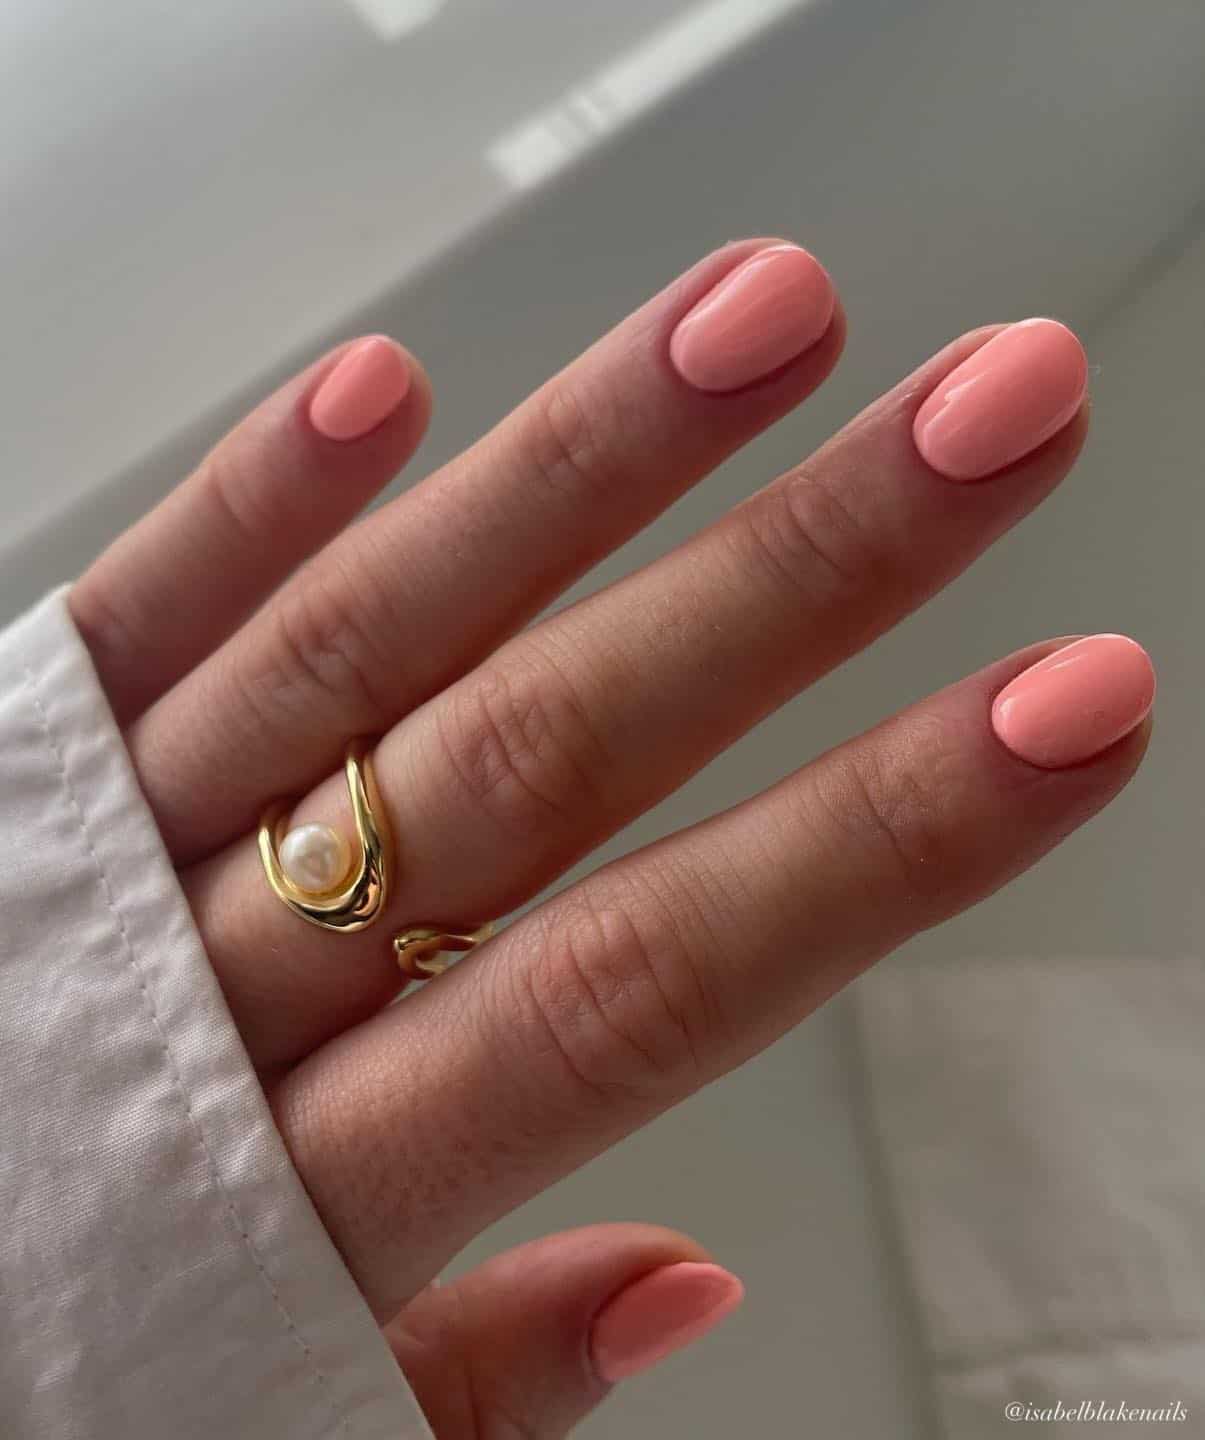 A hand with short round nails painted a soft coral peach color